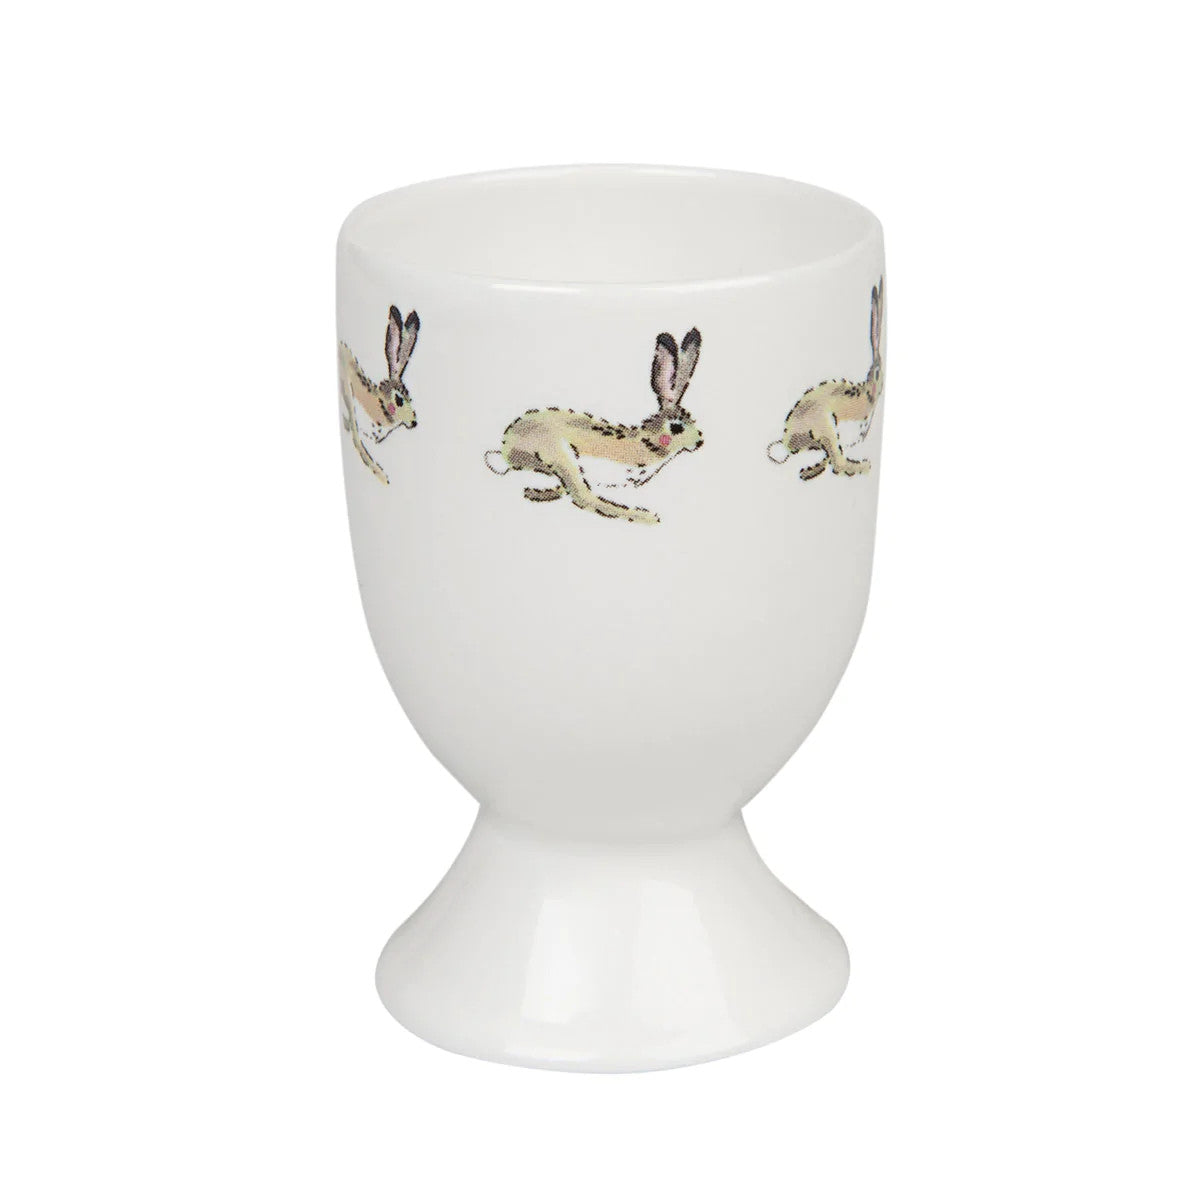 Sophie Allport bone china Gardening Bunny Egg Cup boxed.